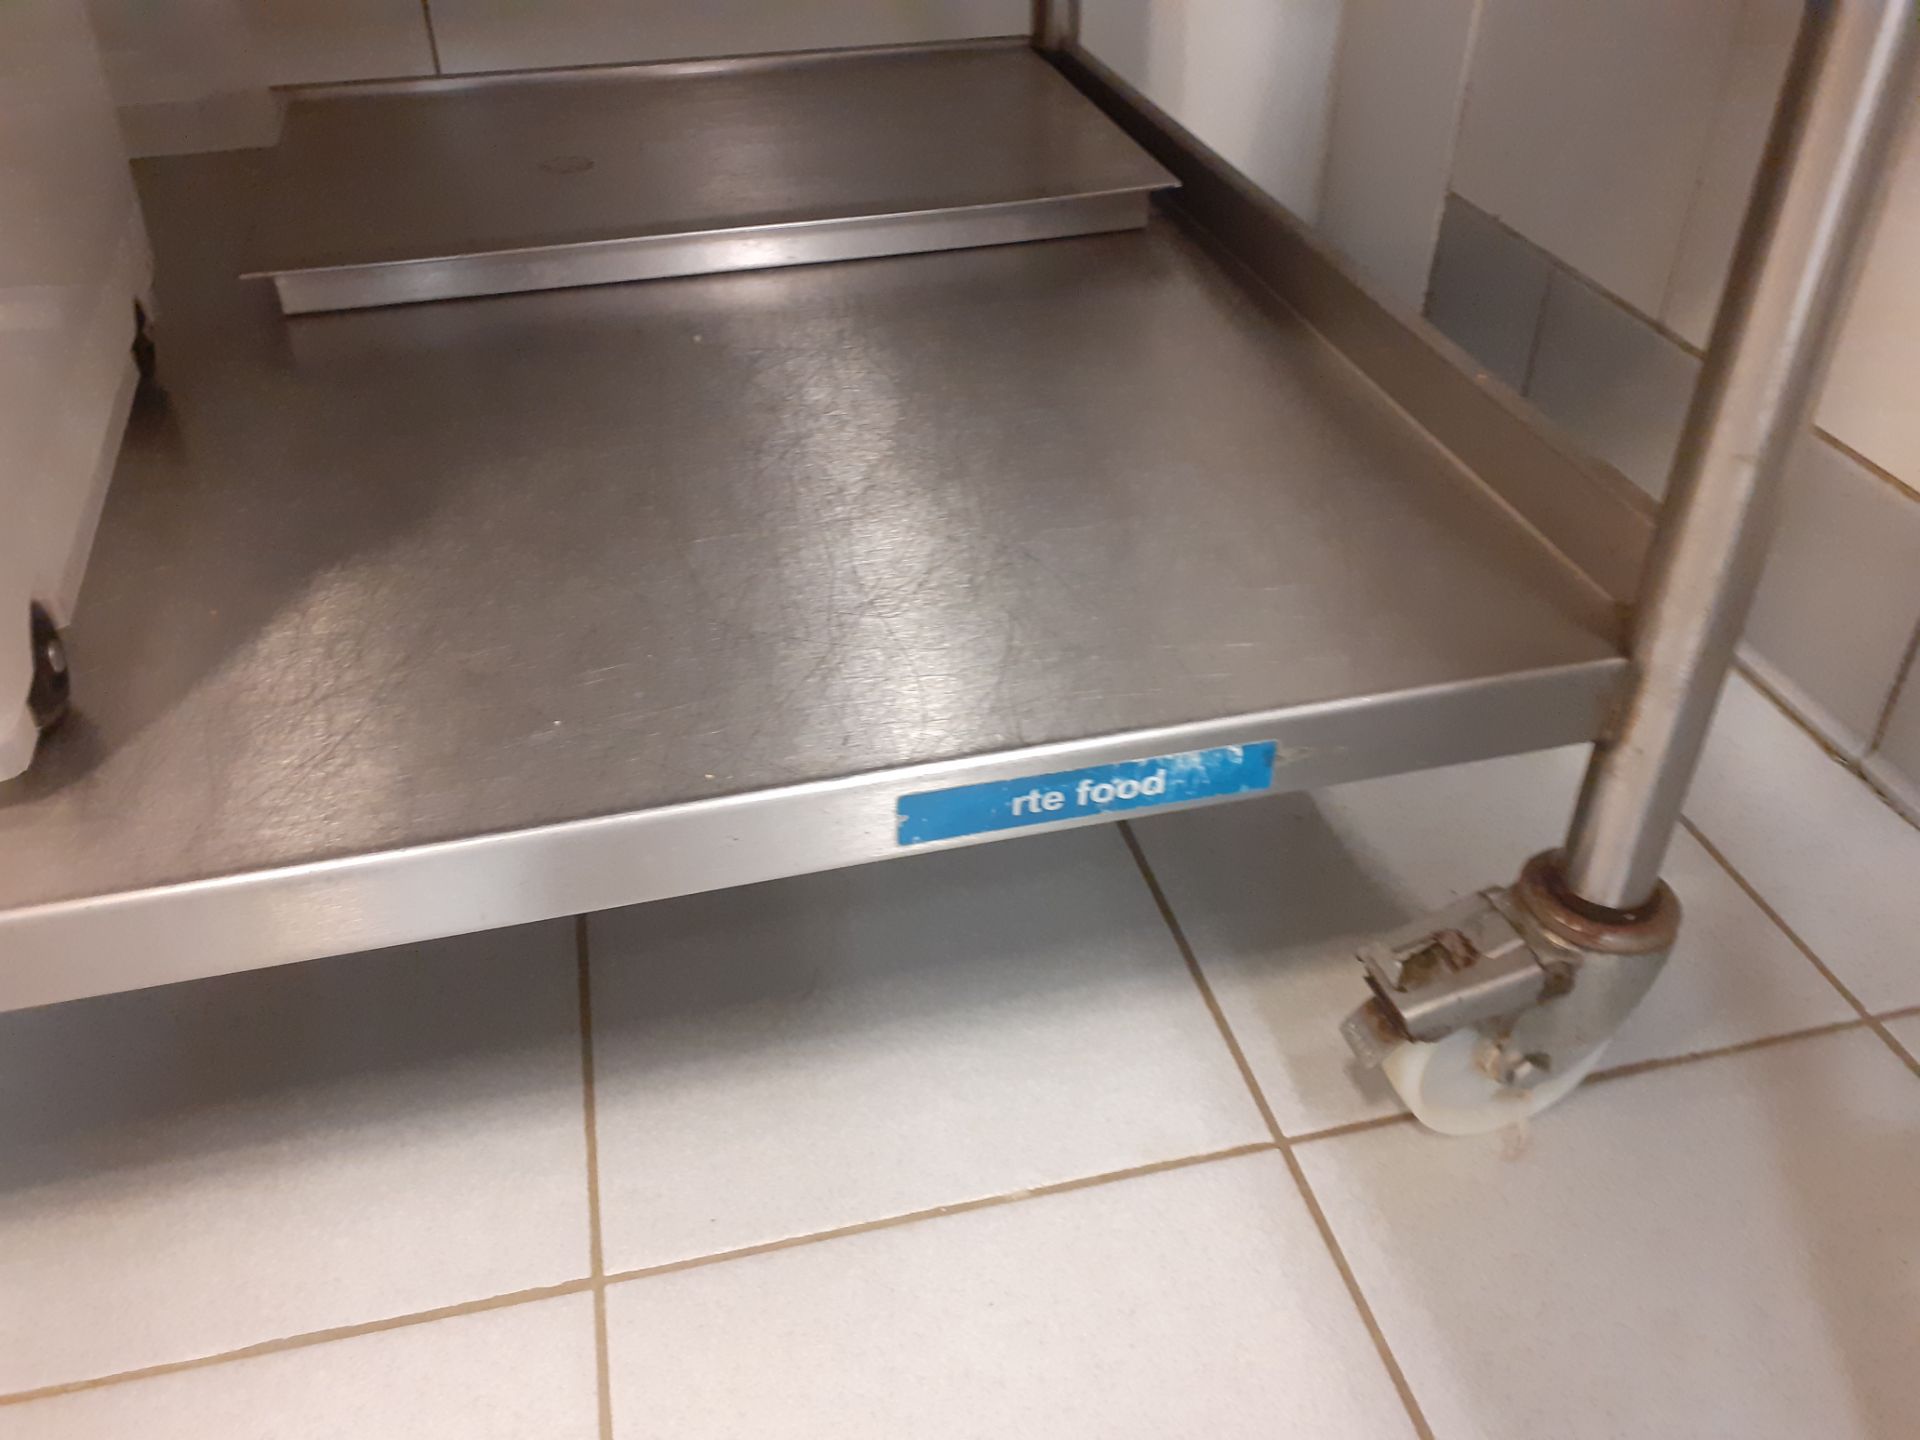 1 x Stainless Steel Prep Counter on Castors - Features Upstand and Undershelf - CL582 - Location: - Image 3 of 4